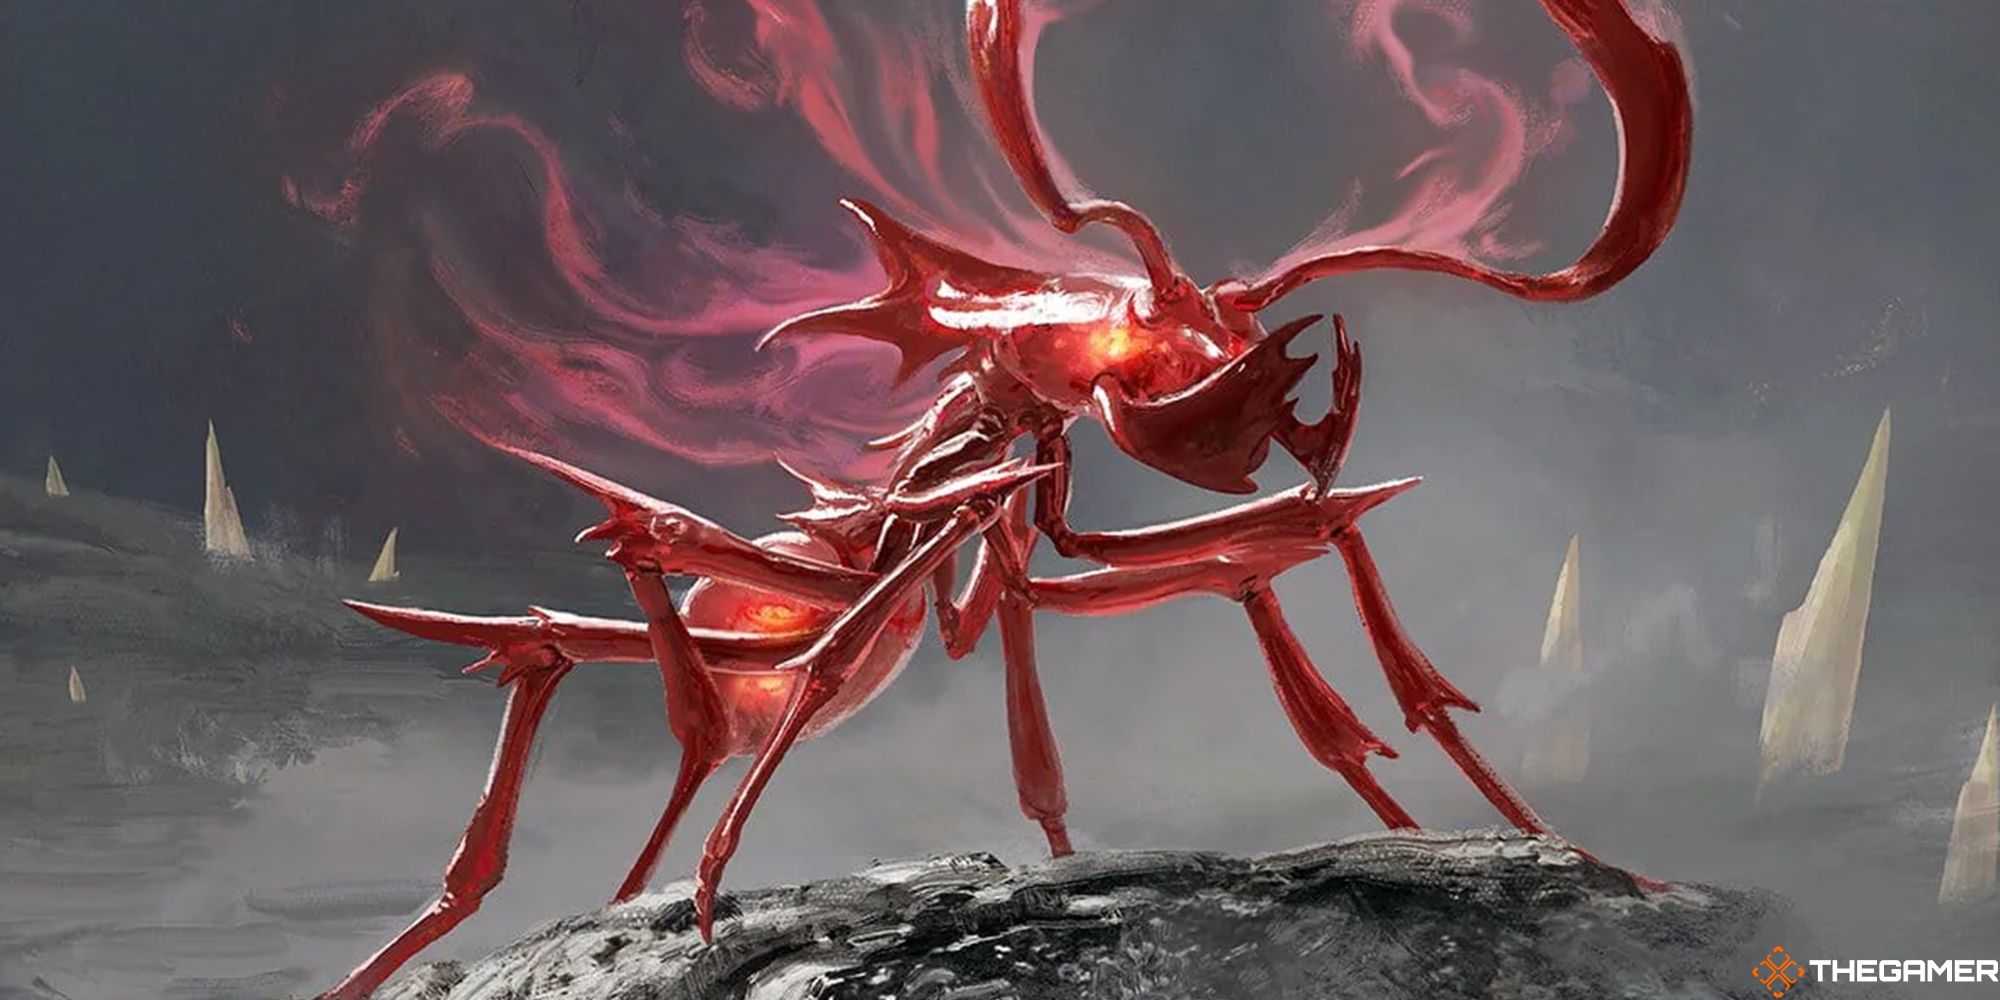 A giant, red ant from D&D